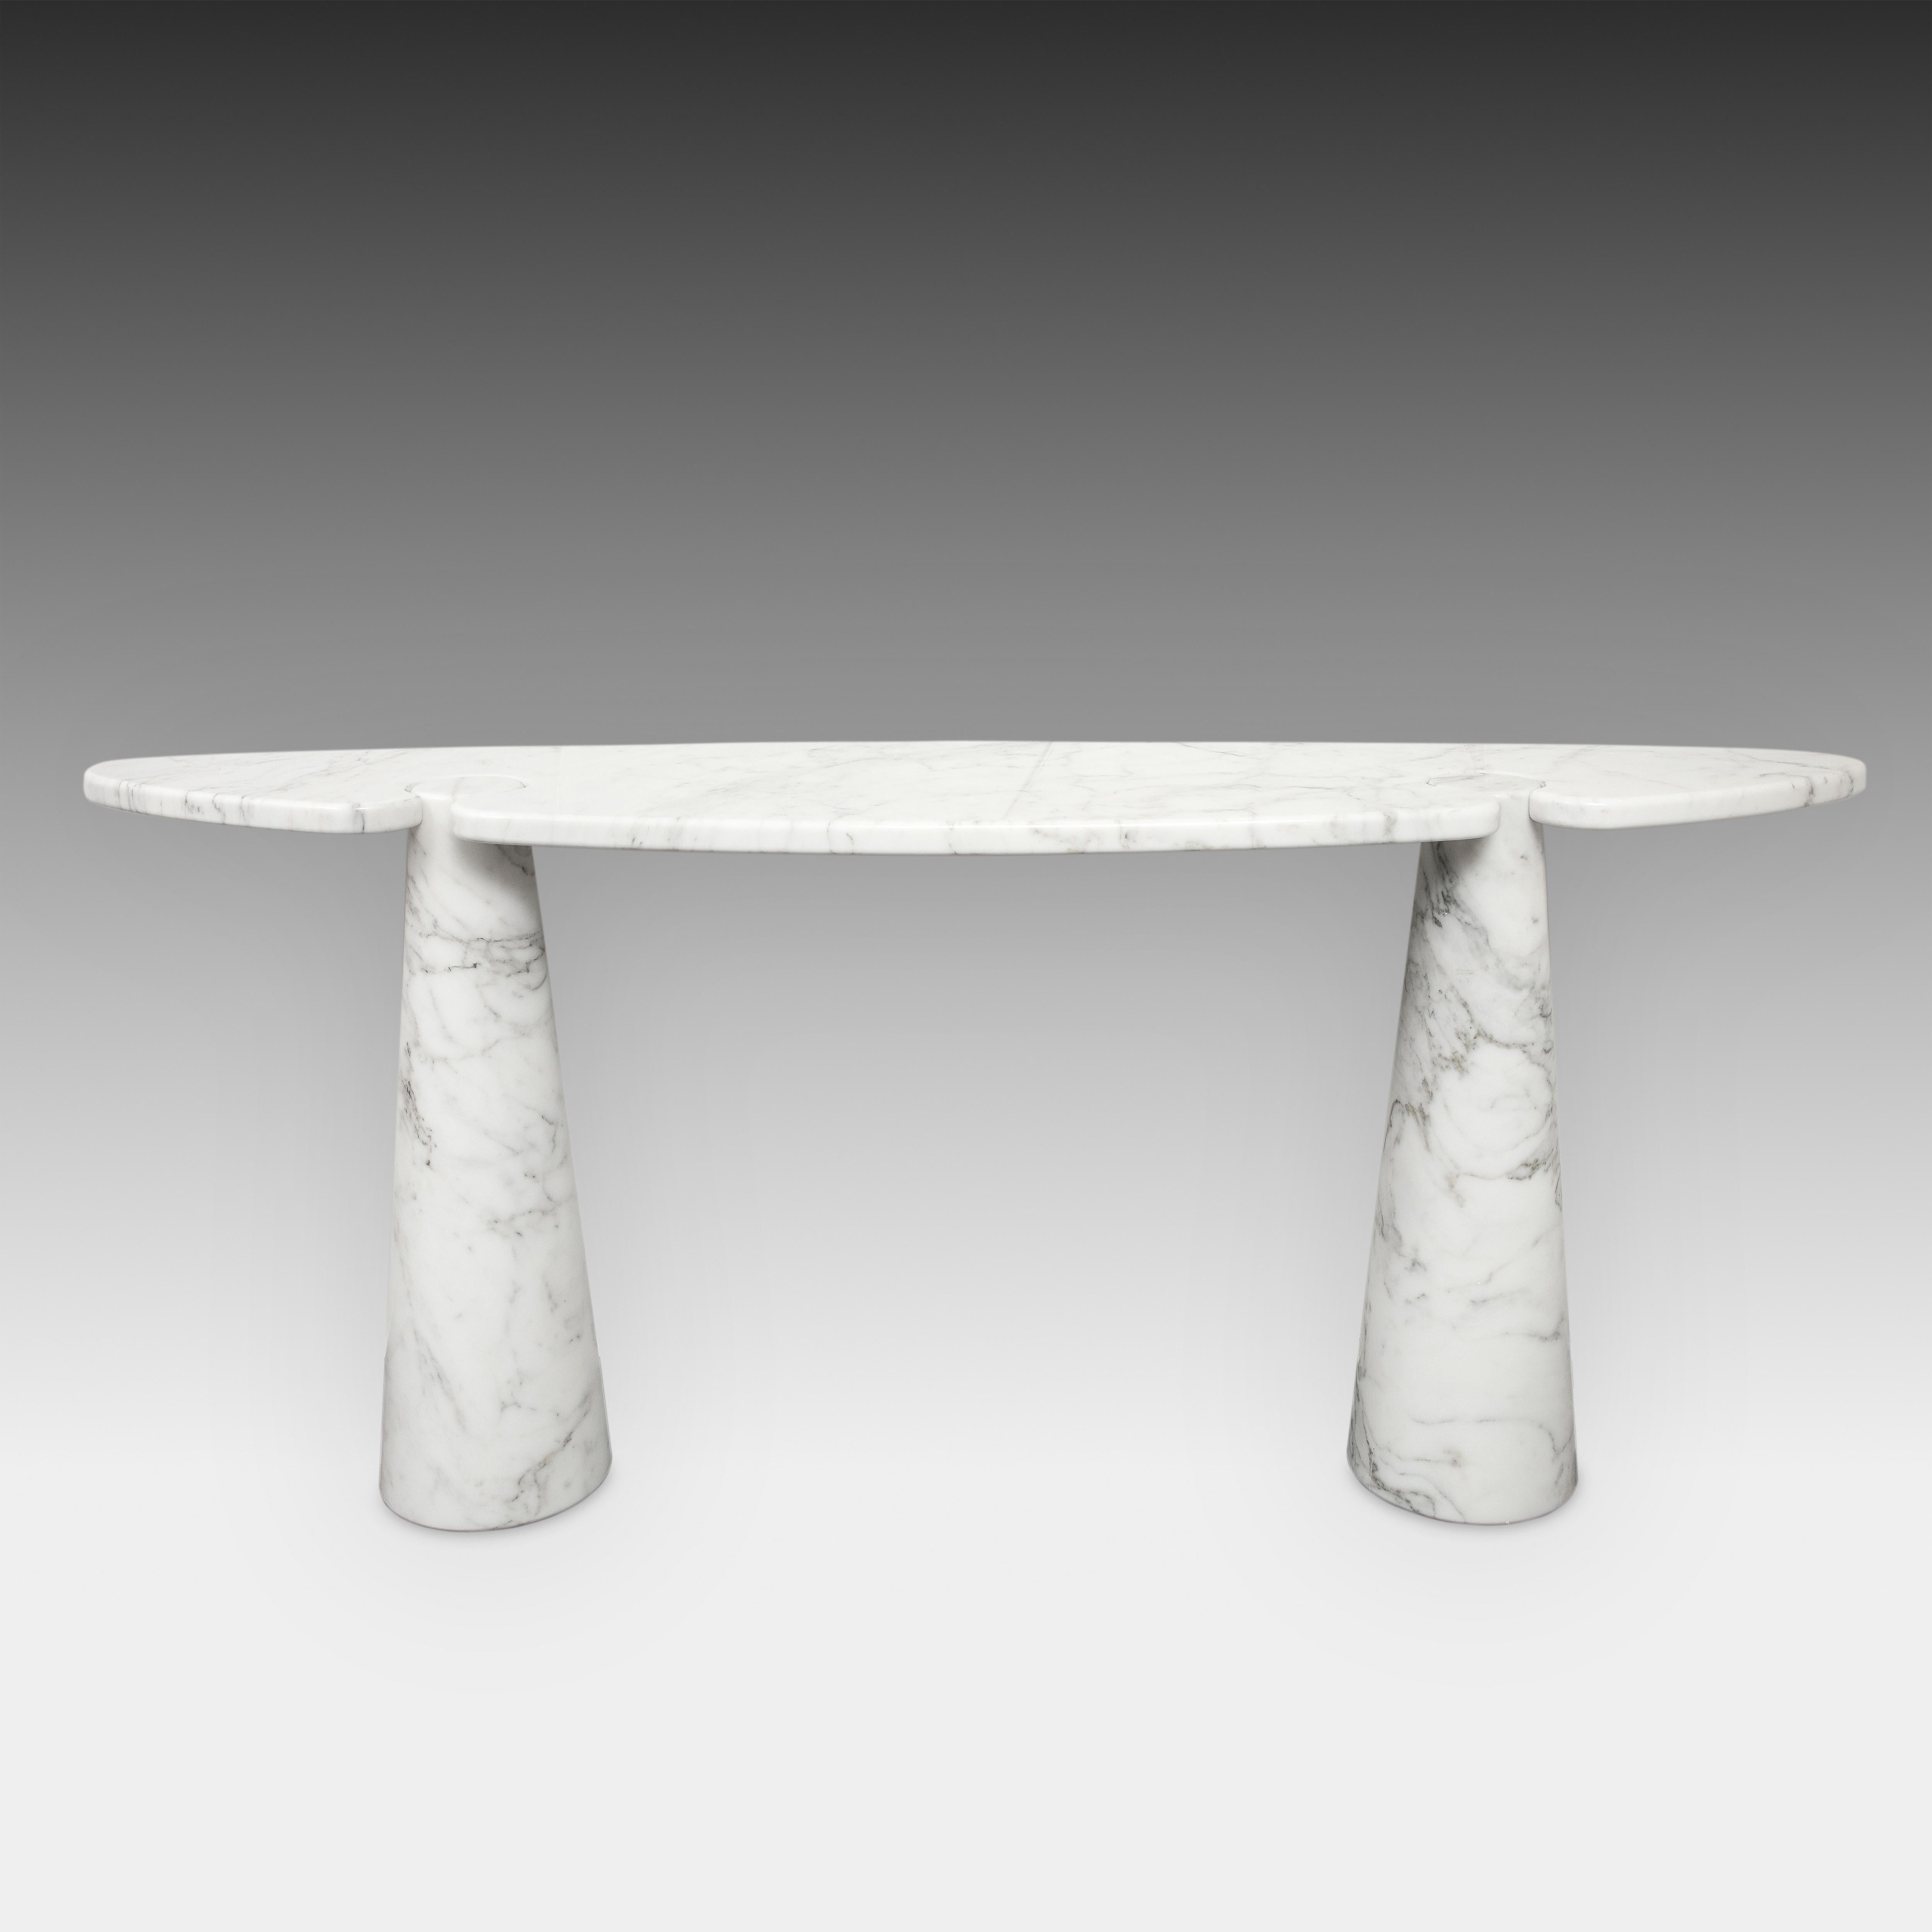 Designed by Angelo Mangiarotti for Skipper from the Eros series, iconic pair of Carrara marble console tables each with large elliptical top fitted on two conical bases. These elegantly organic console tables have beautiful subtle veining